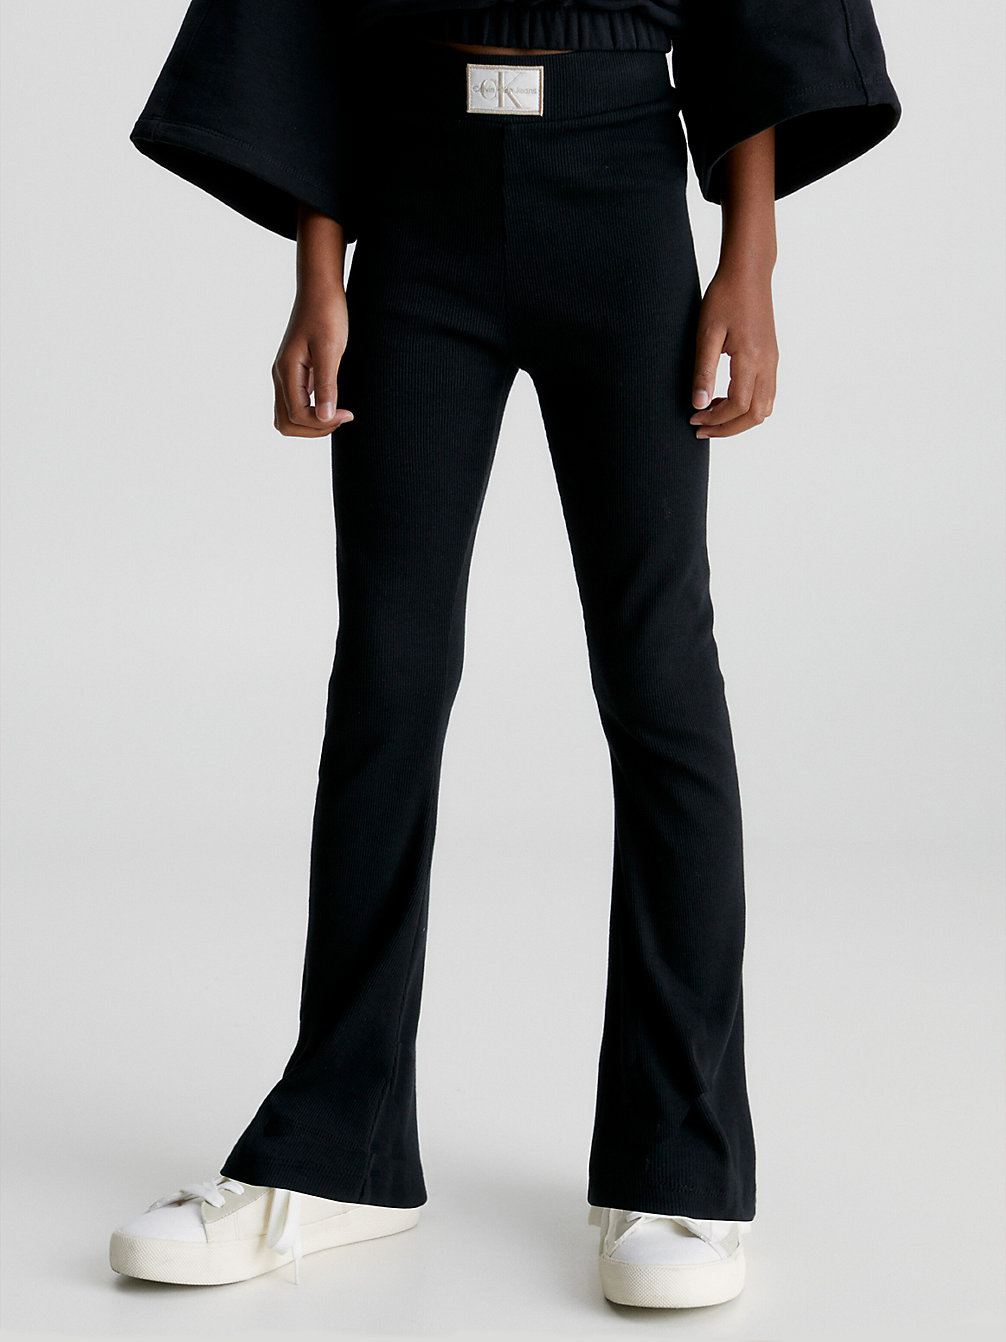 CK BLACK Flared Ribbed Trousers undefined girls Calvin Klein